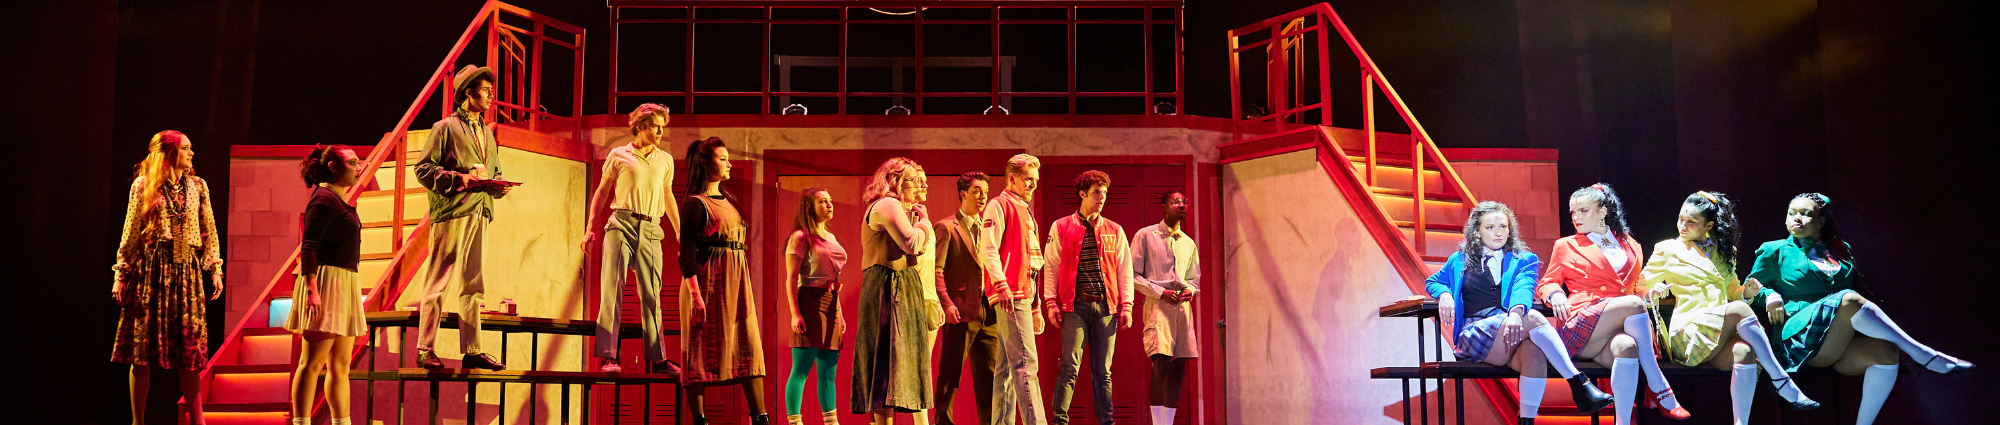 Cast of Heathers on stage.